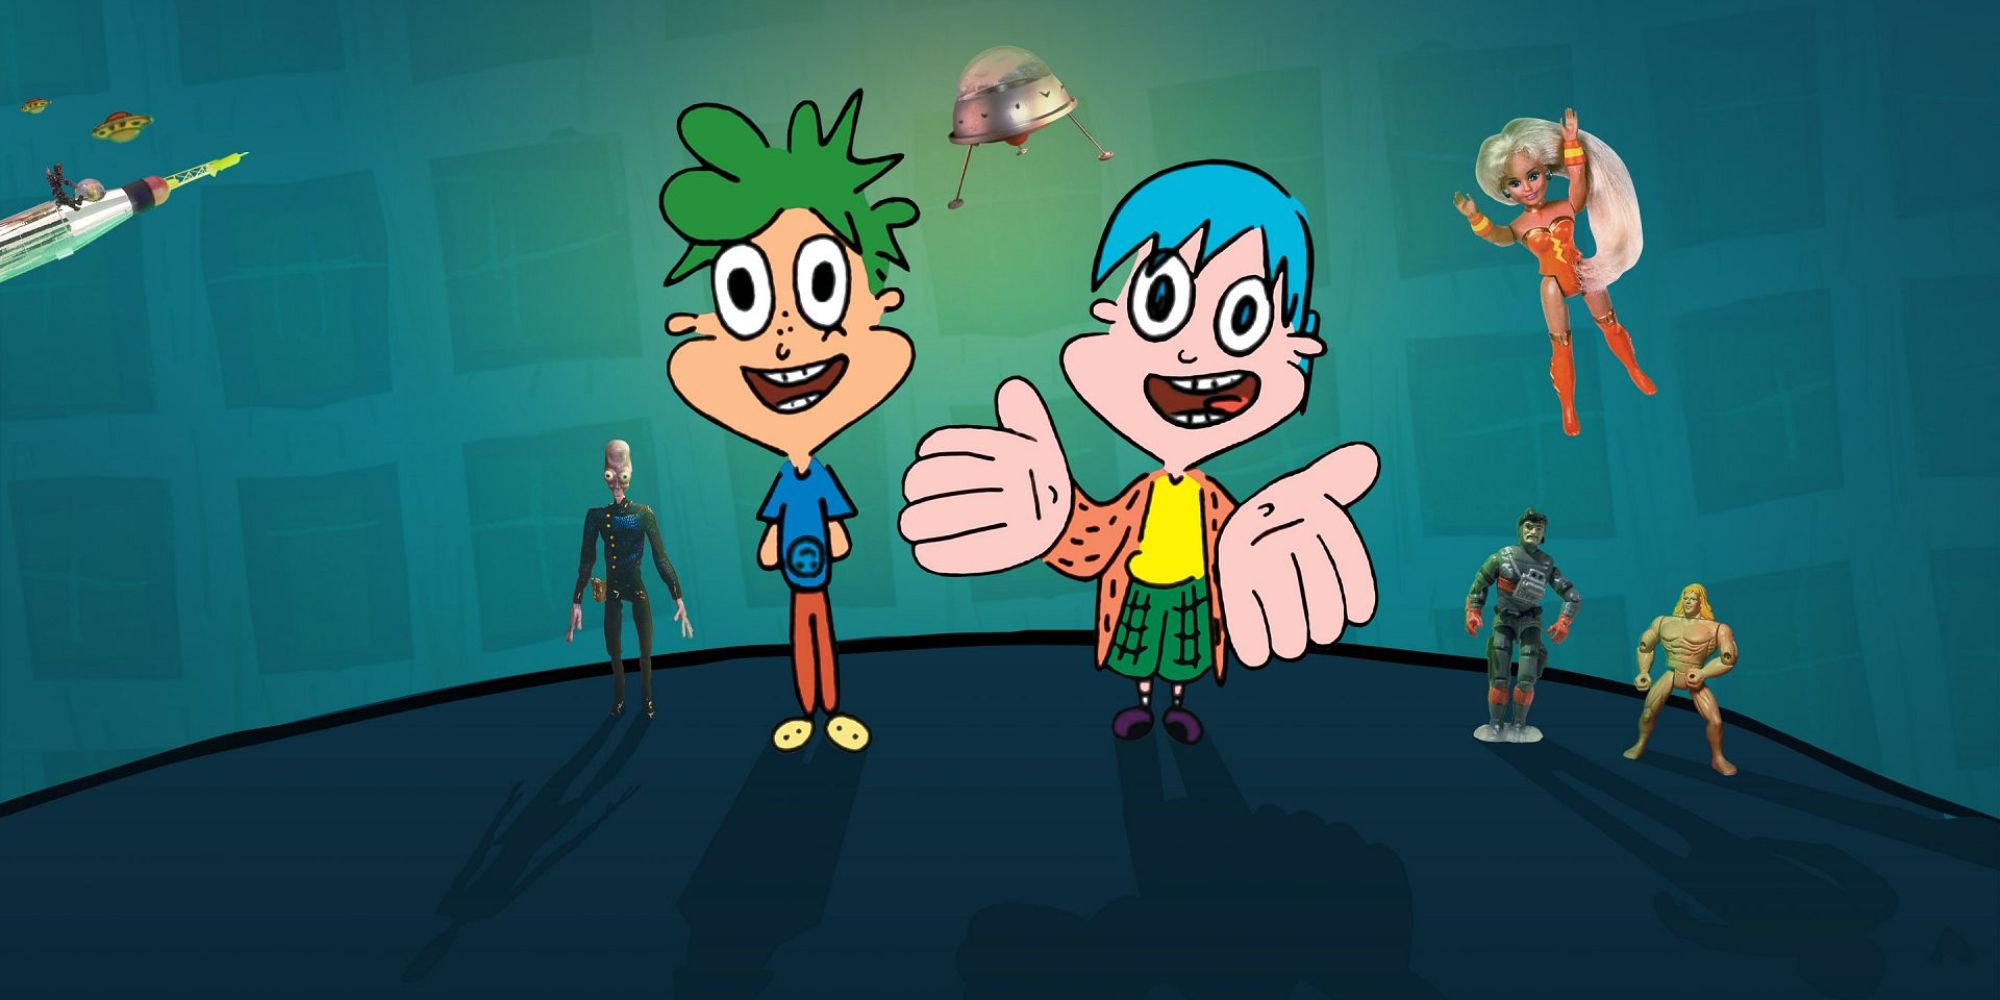 Henry-and-June from Kablam standing with other characters from the show surrounding them